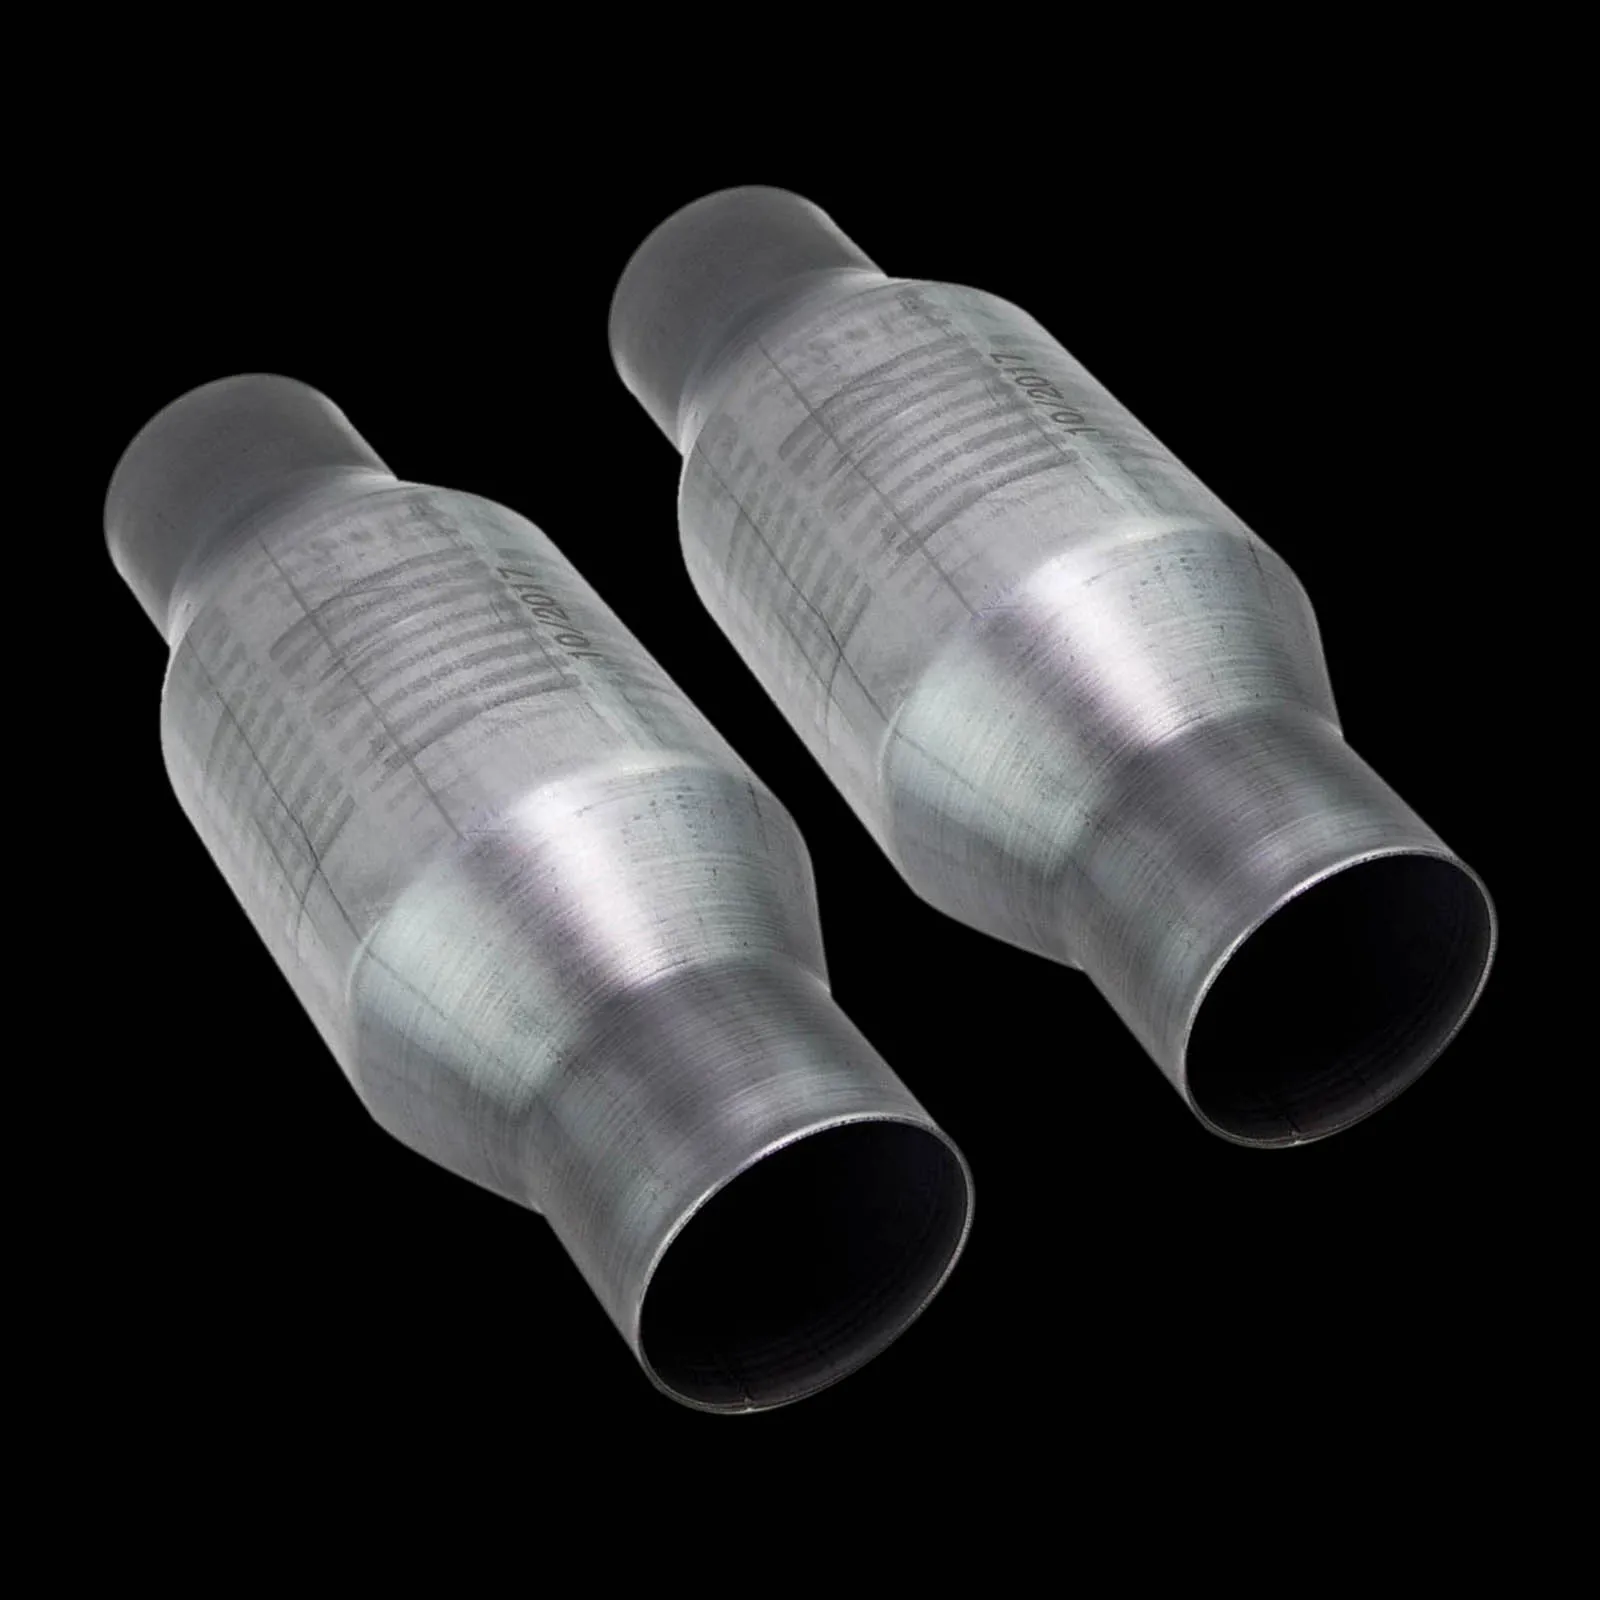 2x 2.5 inches Vehicles Catalytic Converter High Flow Stainless steel 410250